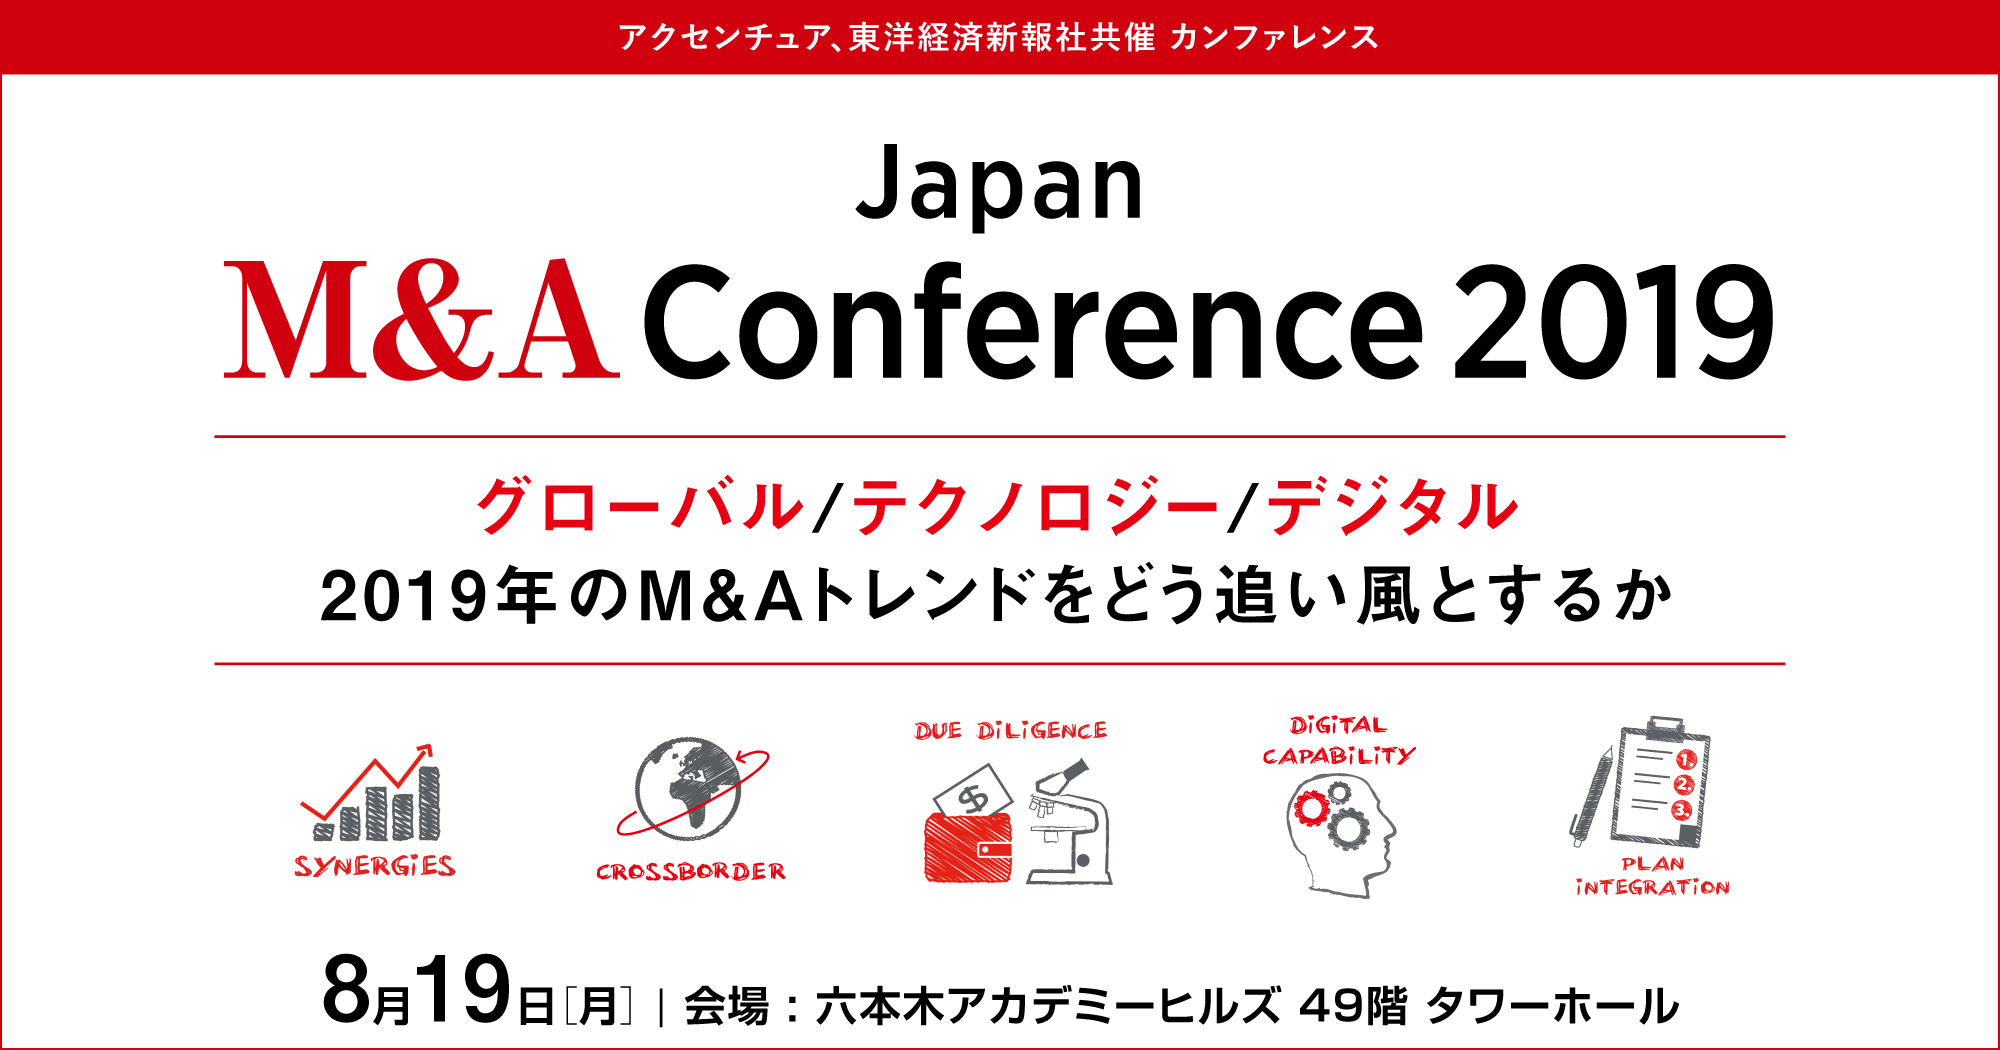 Japan M&A Conference 2019